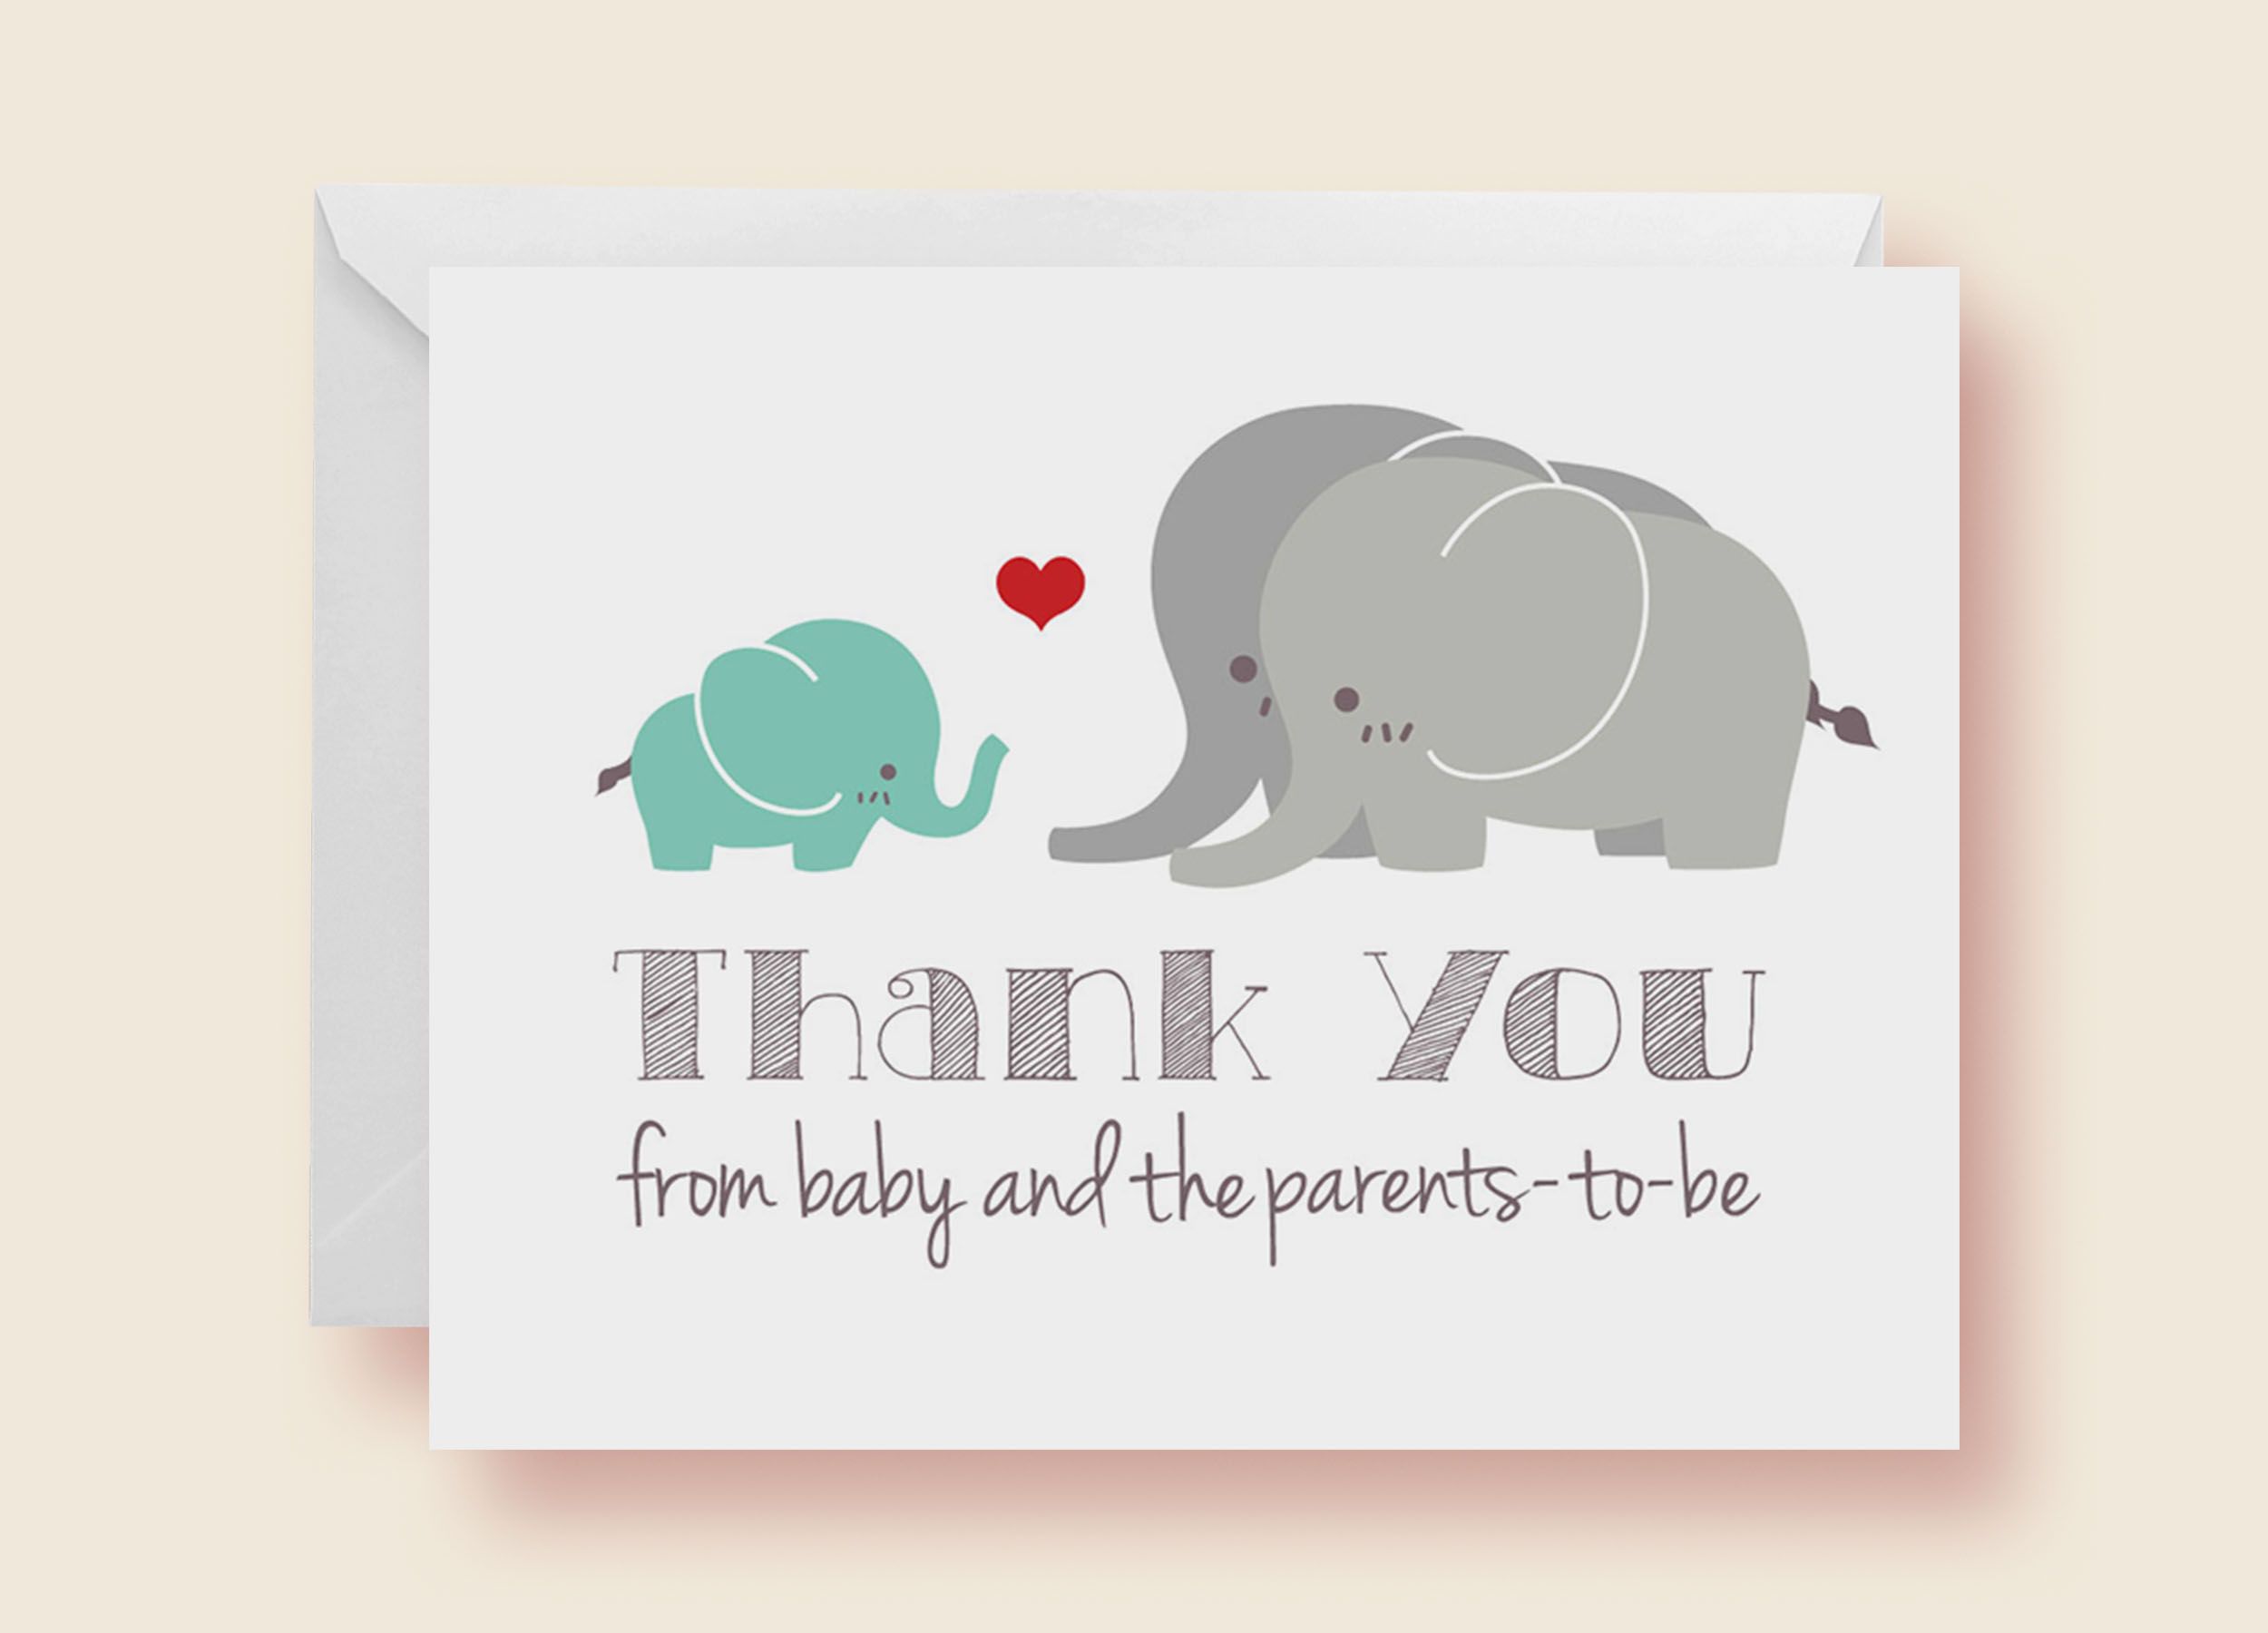 Full Size of Baby Shower:72+ Rousing Baby Shower Thank You Cards Picture Ideas Baby Shower Hashtag Ideas With Baby Shower Pictures Plus Martha Stewart Baby Shower Together With Baby Shower Presents As Well As Baby Shower Cake Ideas And Baby Shower Party